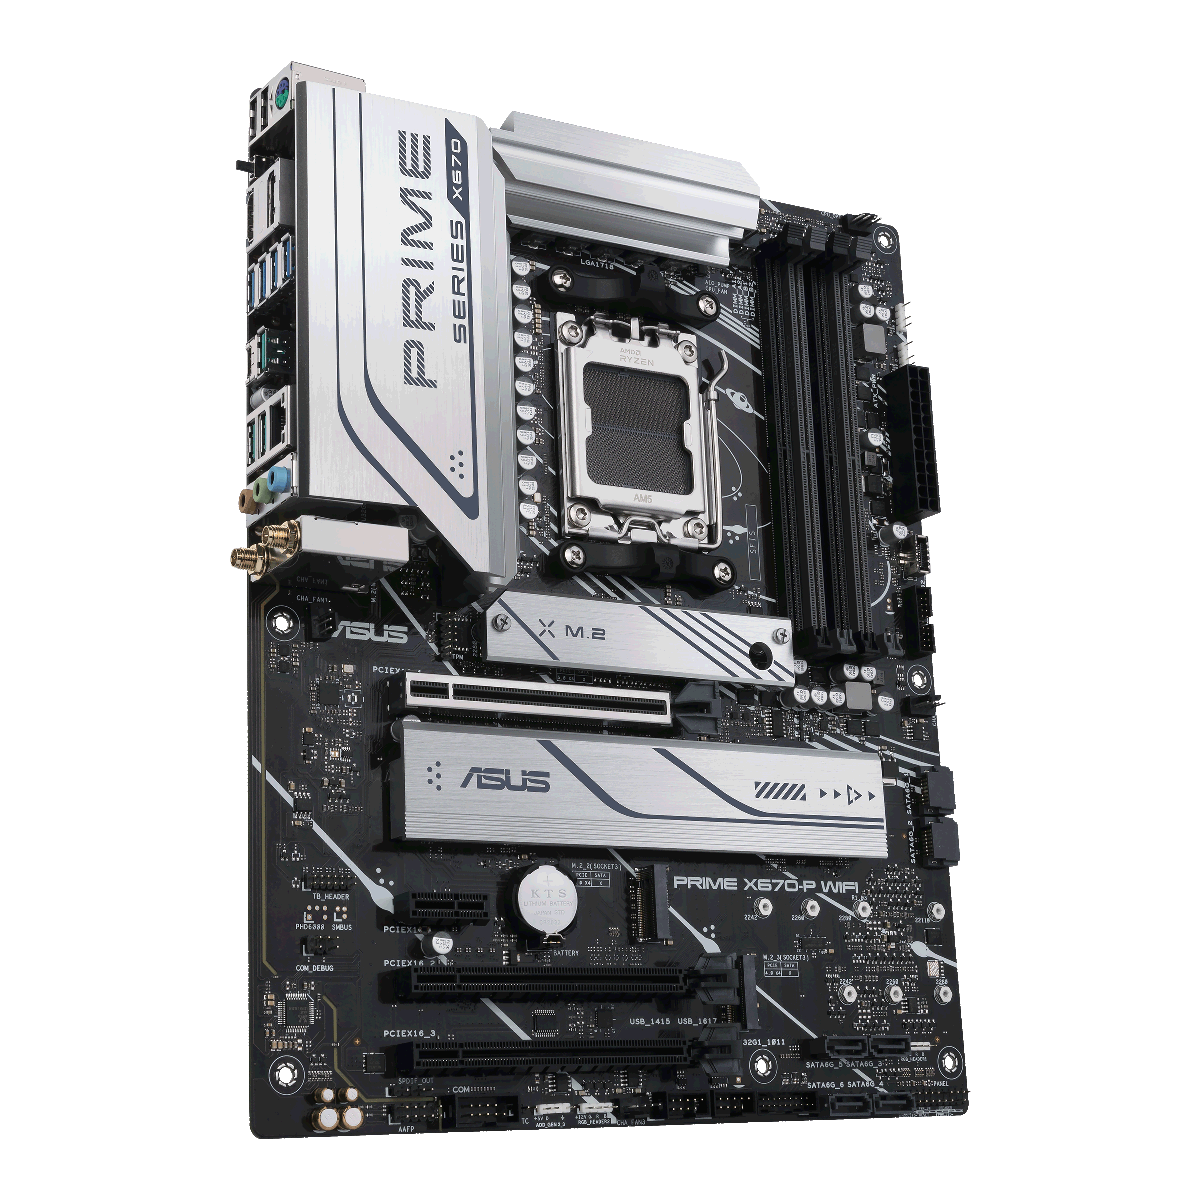 The PRIME X670-P WIFI motherboard features Aura Sync. 